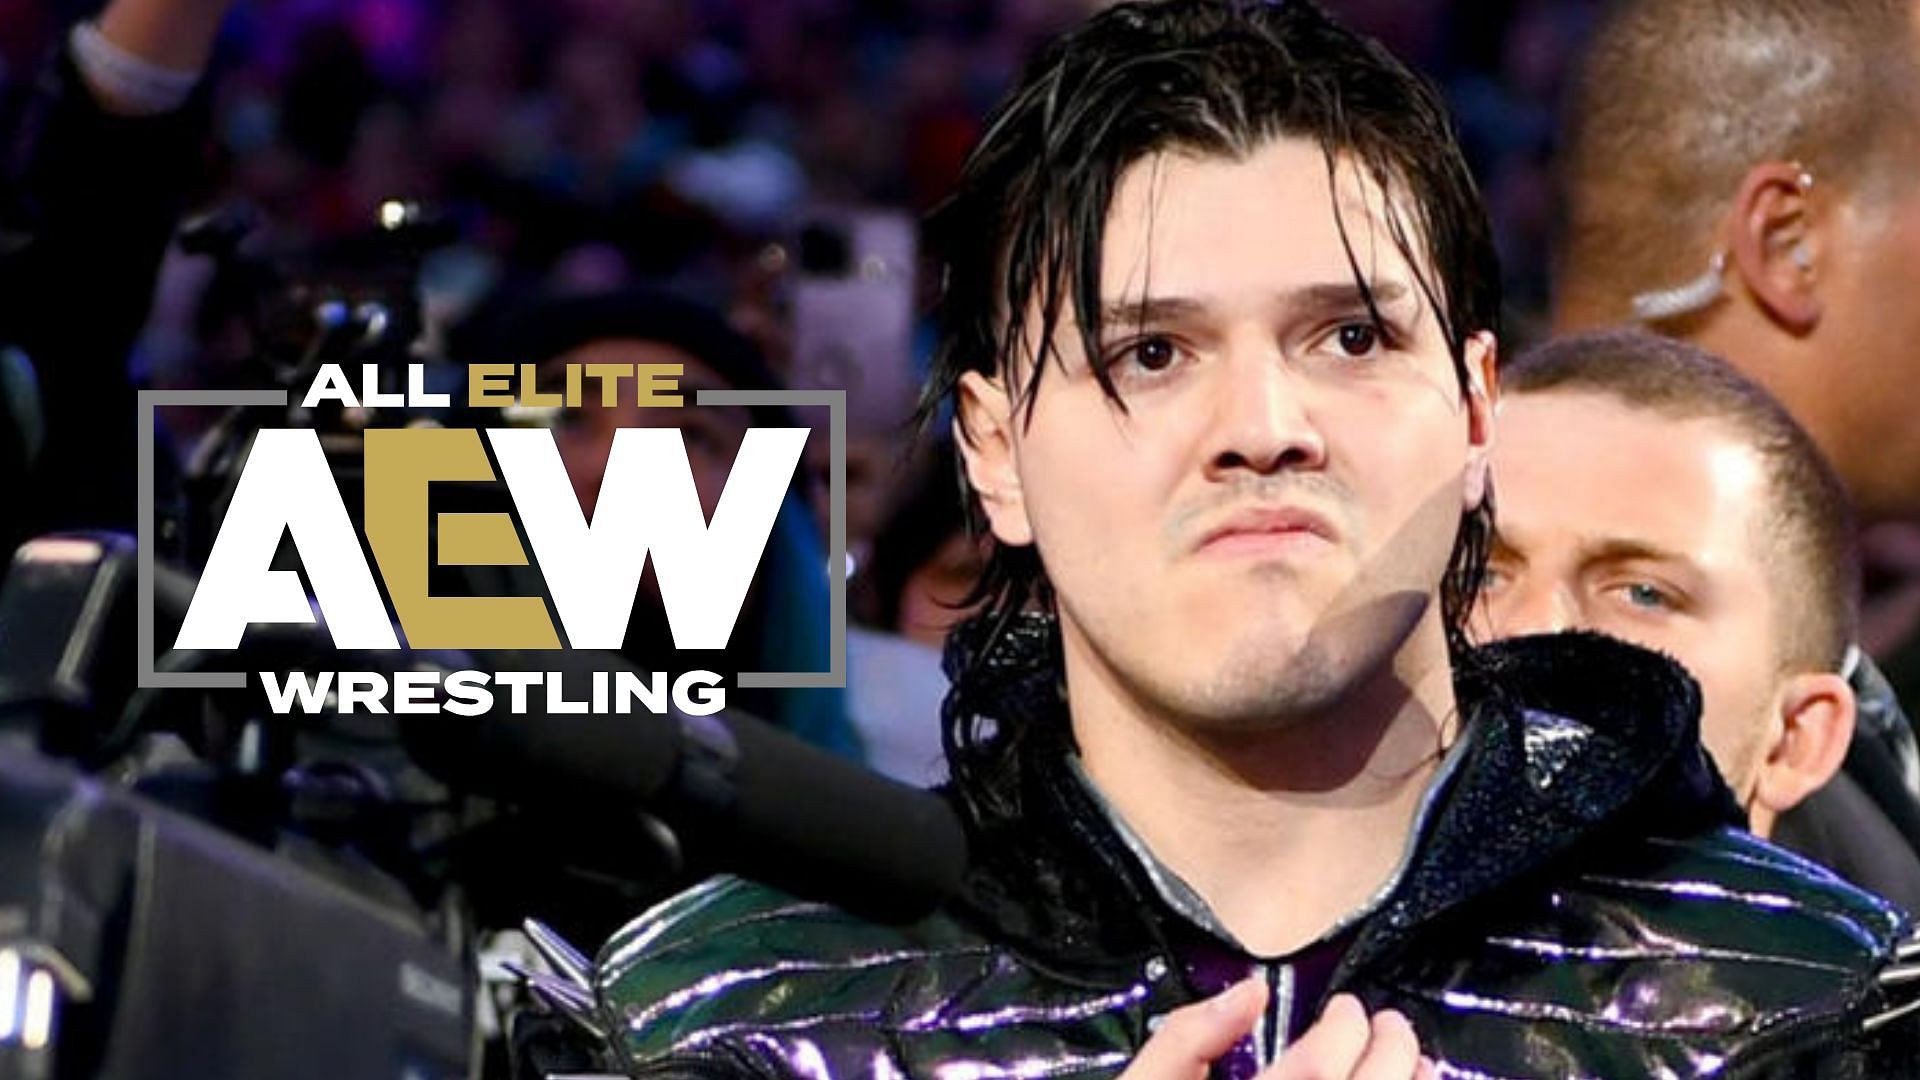 Which wrestling veteran thinks Dominik Mysterio is a better heel than a top AEW star?